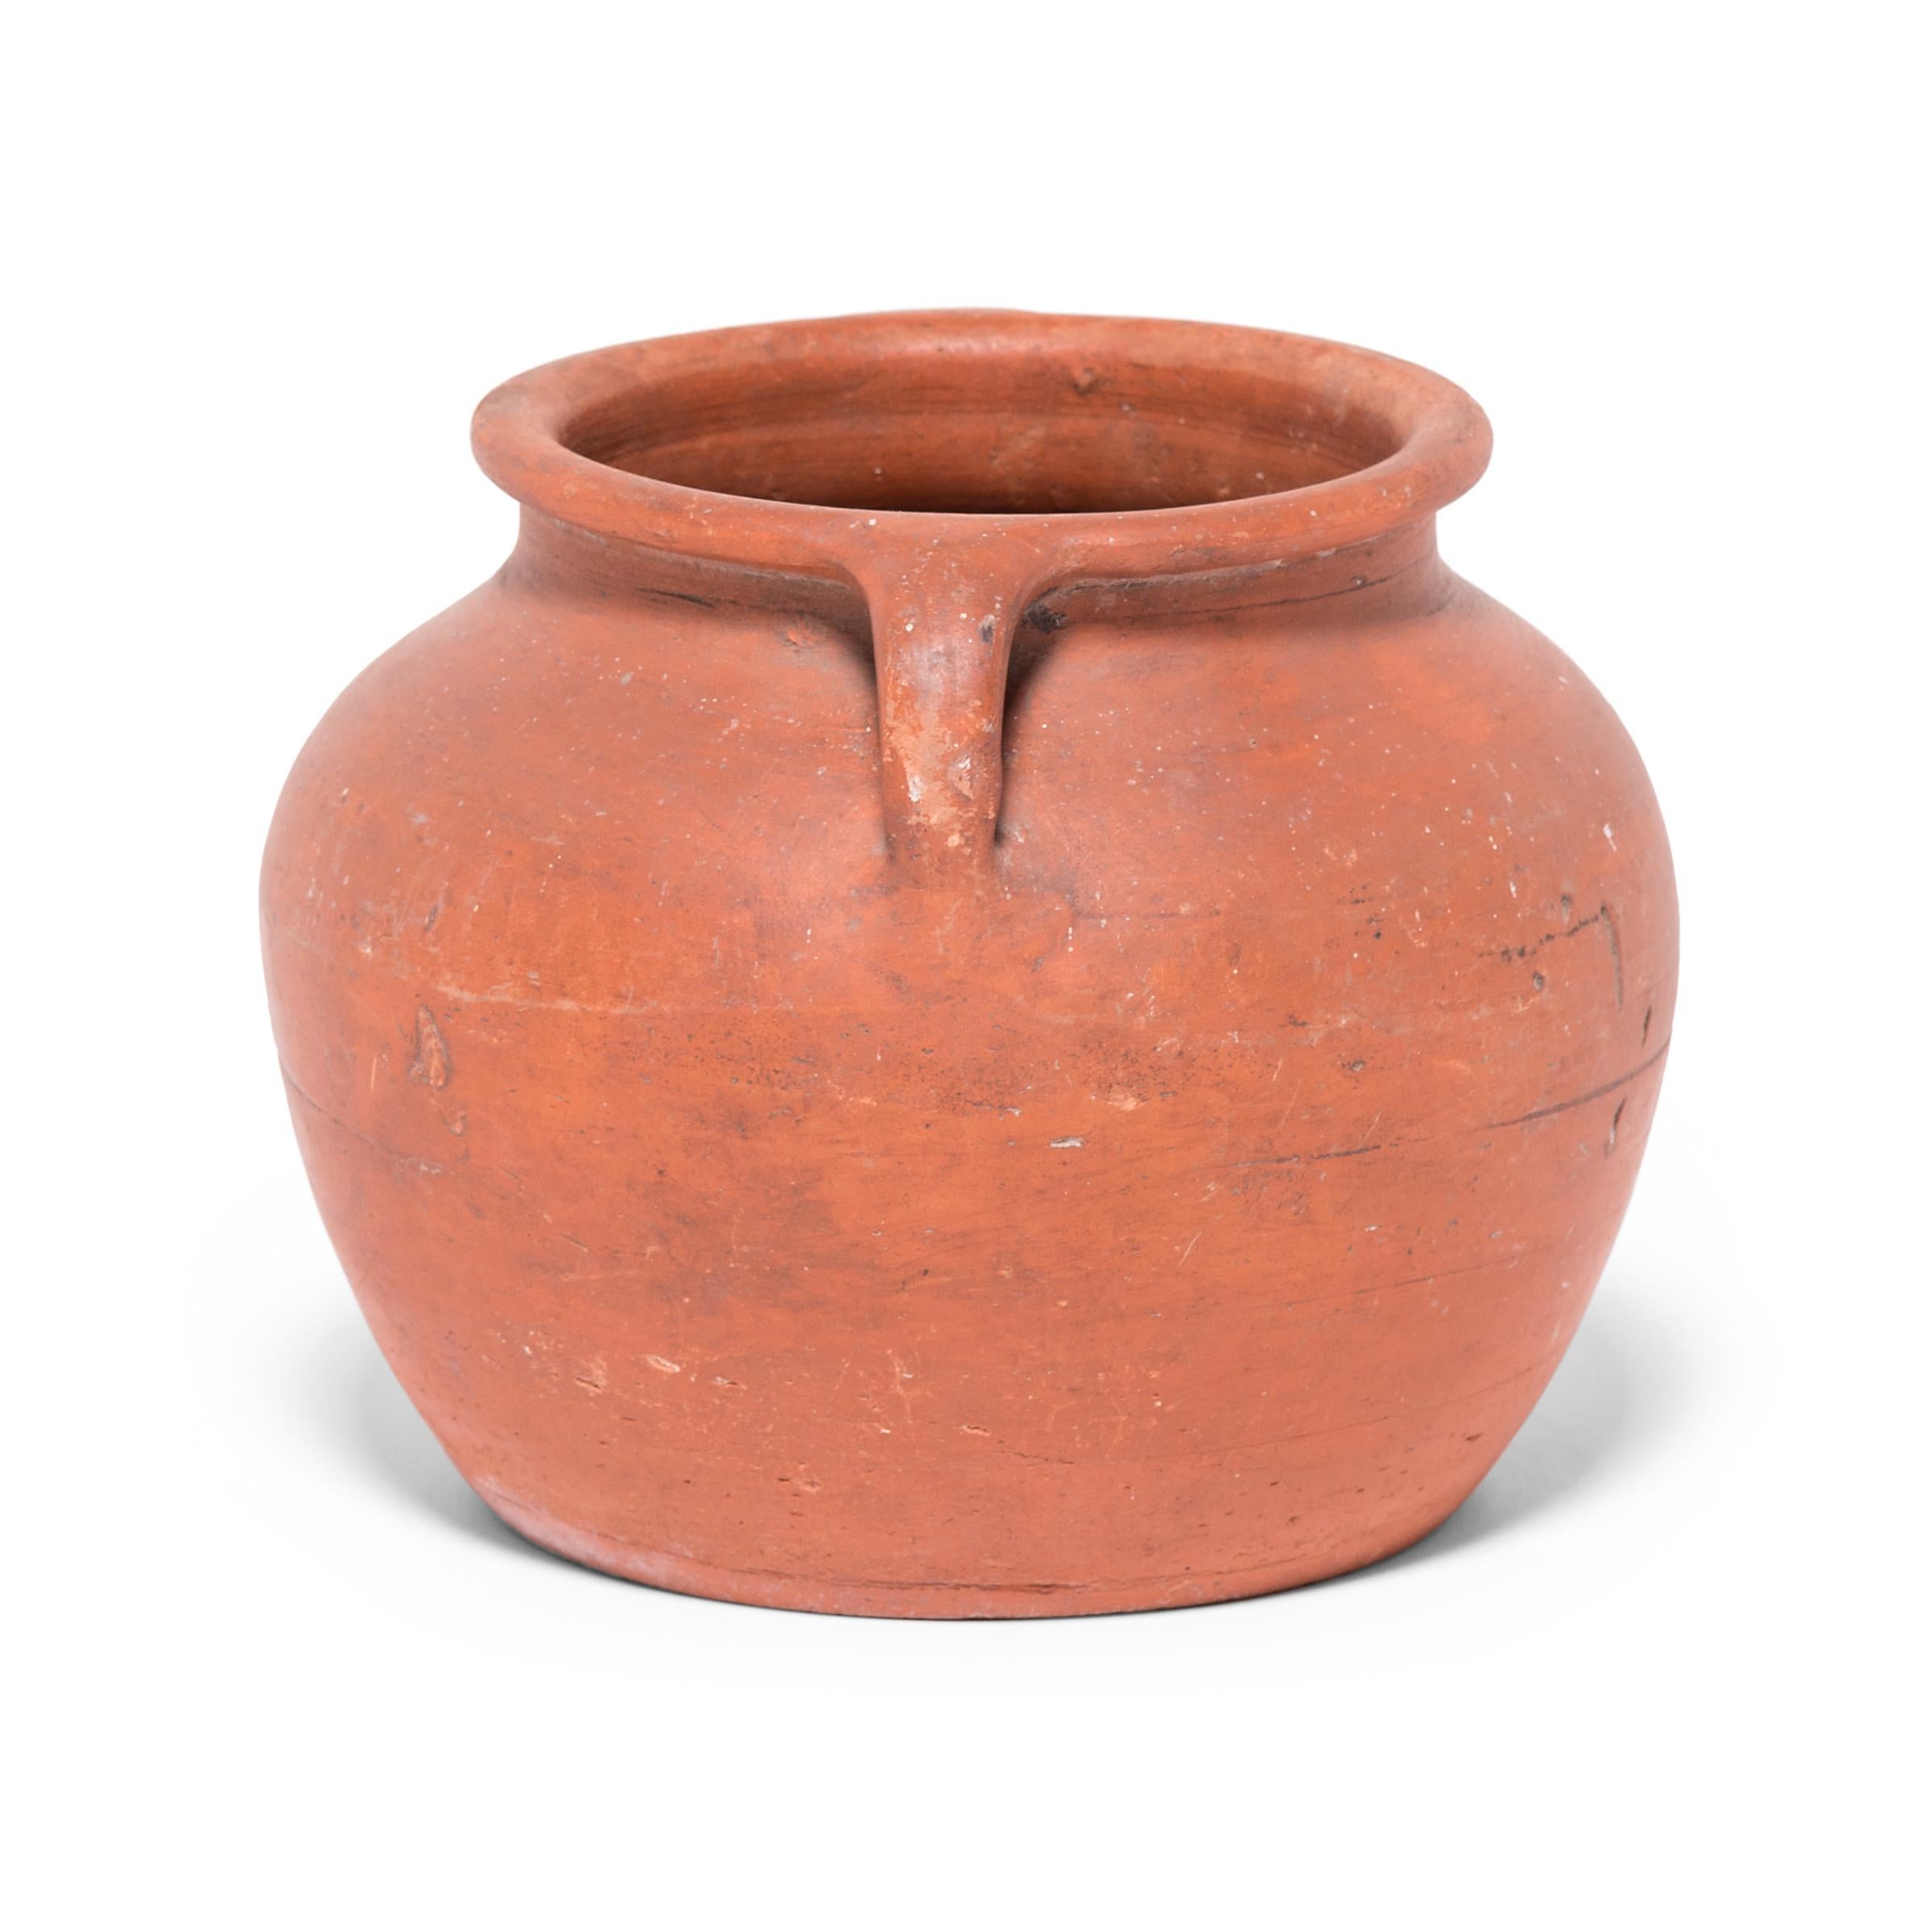 Based on vessels fired in ancient Chinese kilns, this jar's perfect proportions haven't changed much since the bronze age. Keeping in the tradition of its predecessors, this early 20th century ceramic vessel is glazed with a slip of red clay,